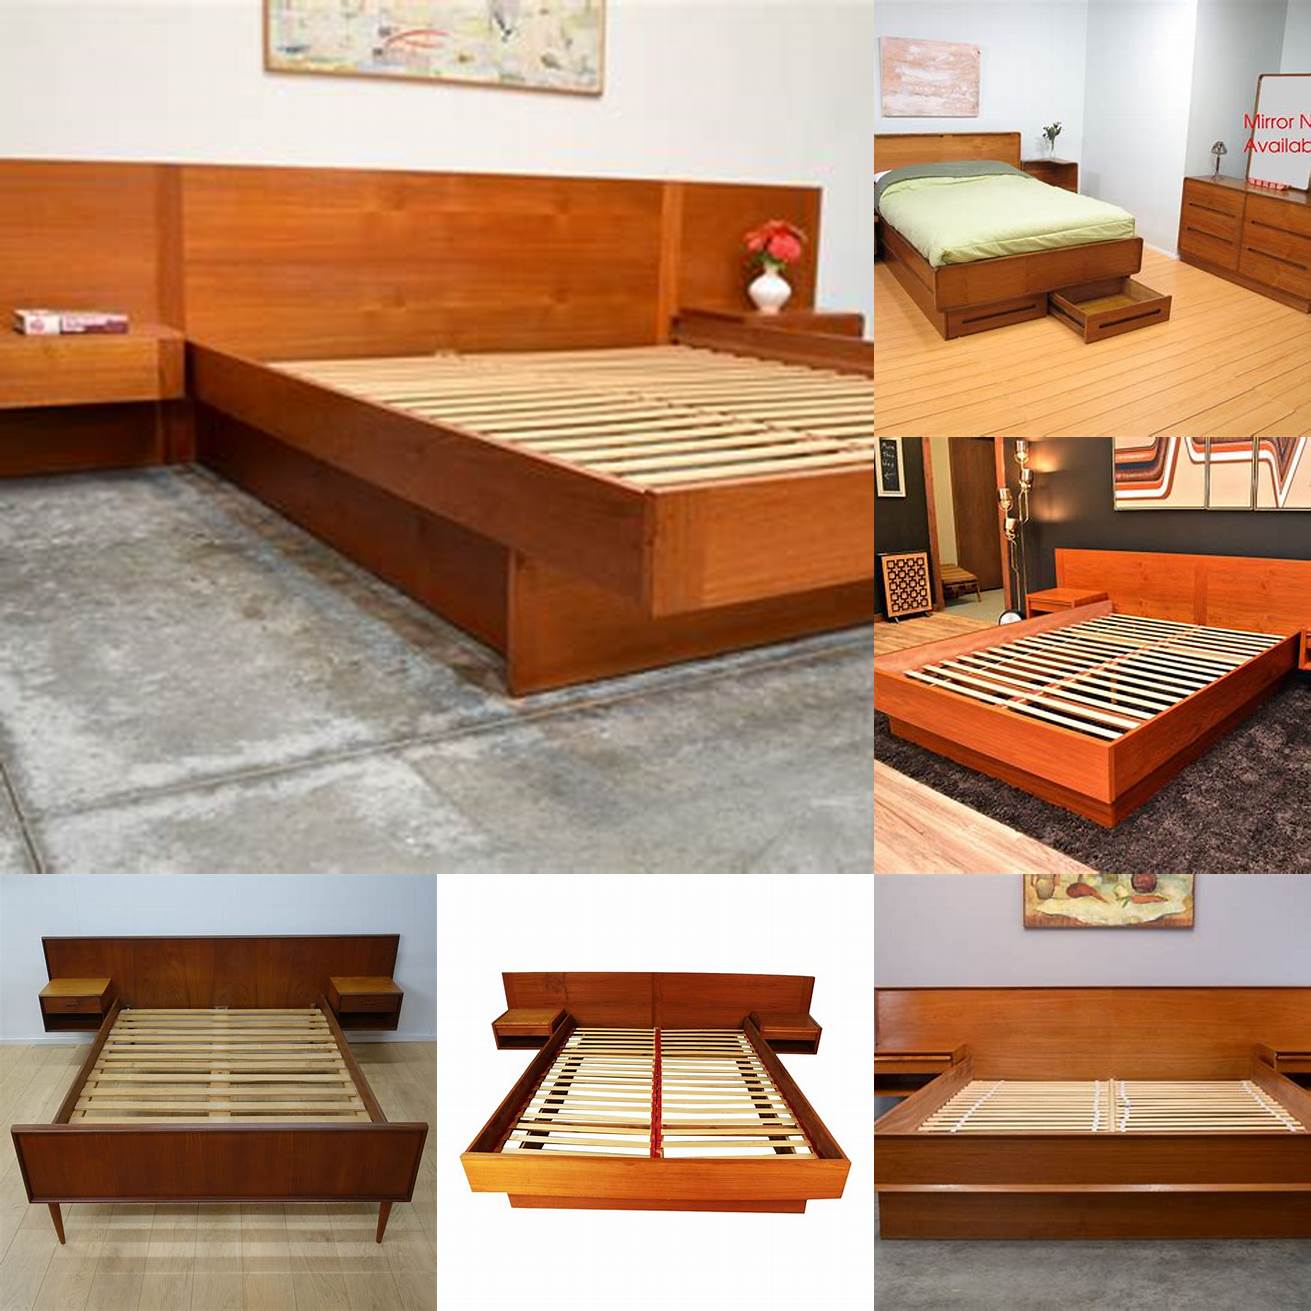 Pair a Teak Bed with a Headboard